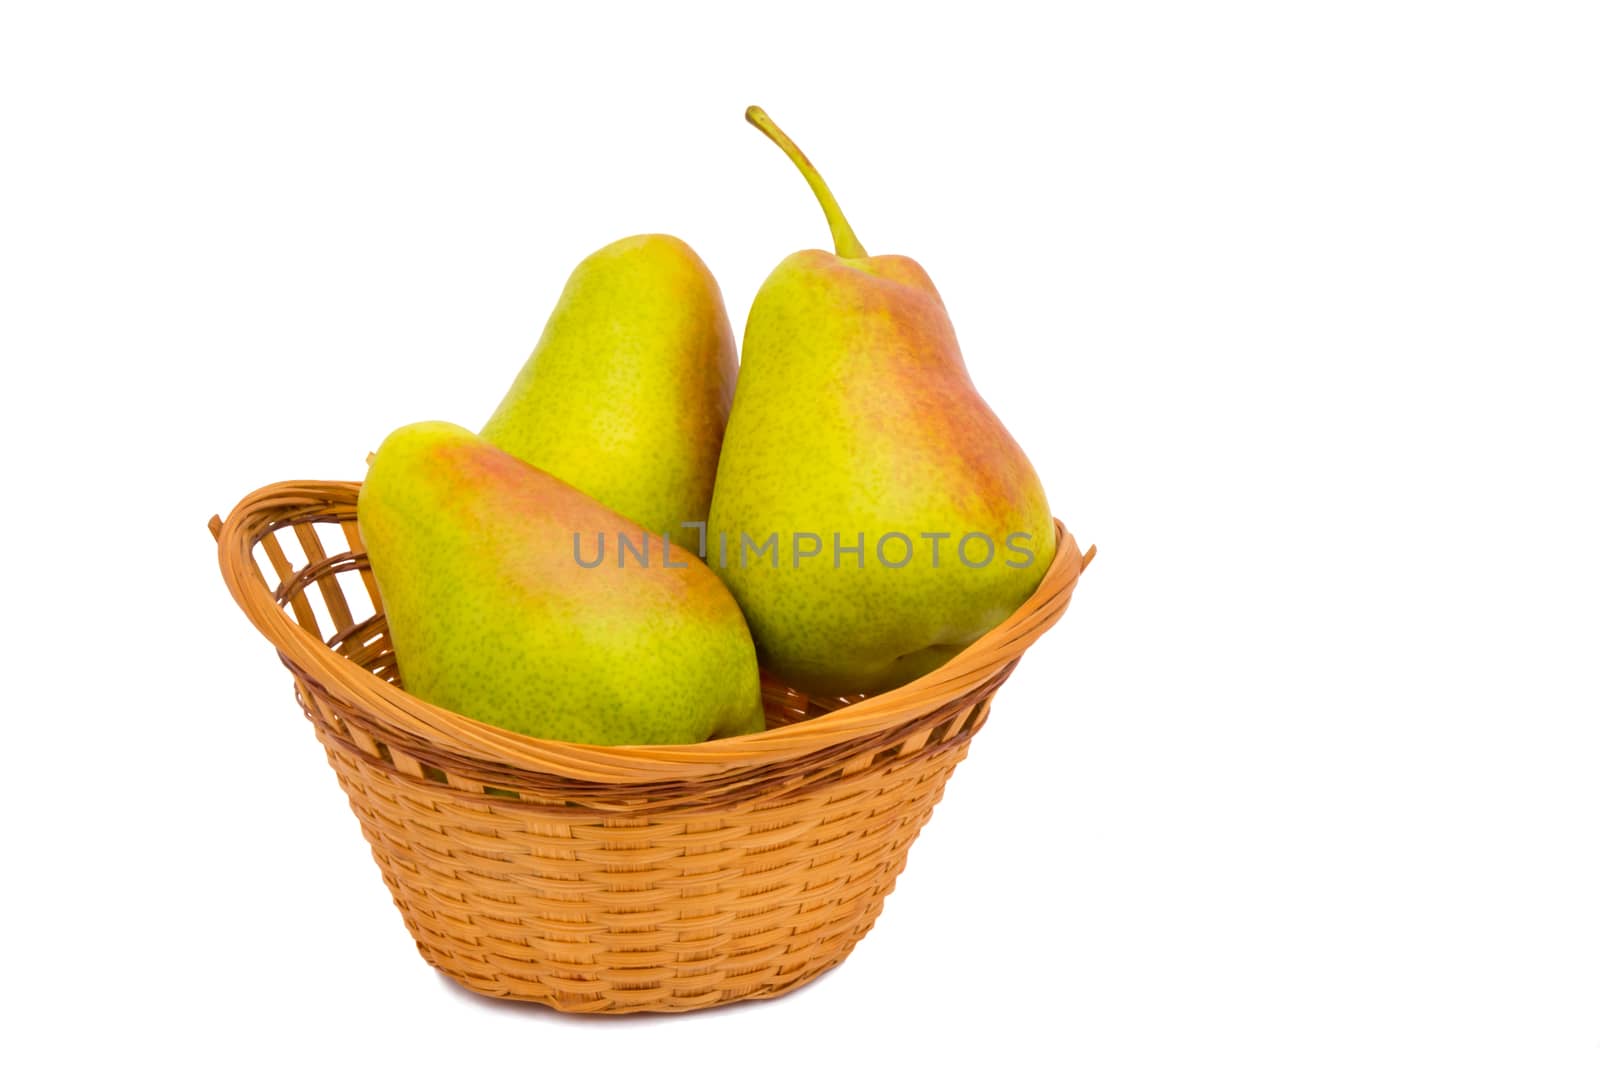 On a white background wicker basket, there are large ripe, juicy pears.